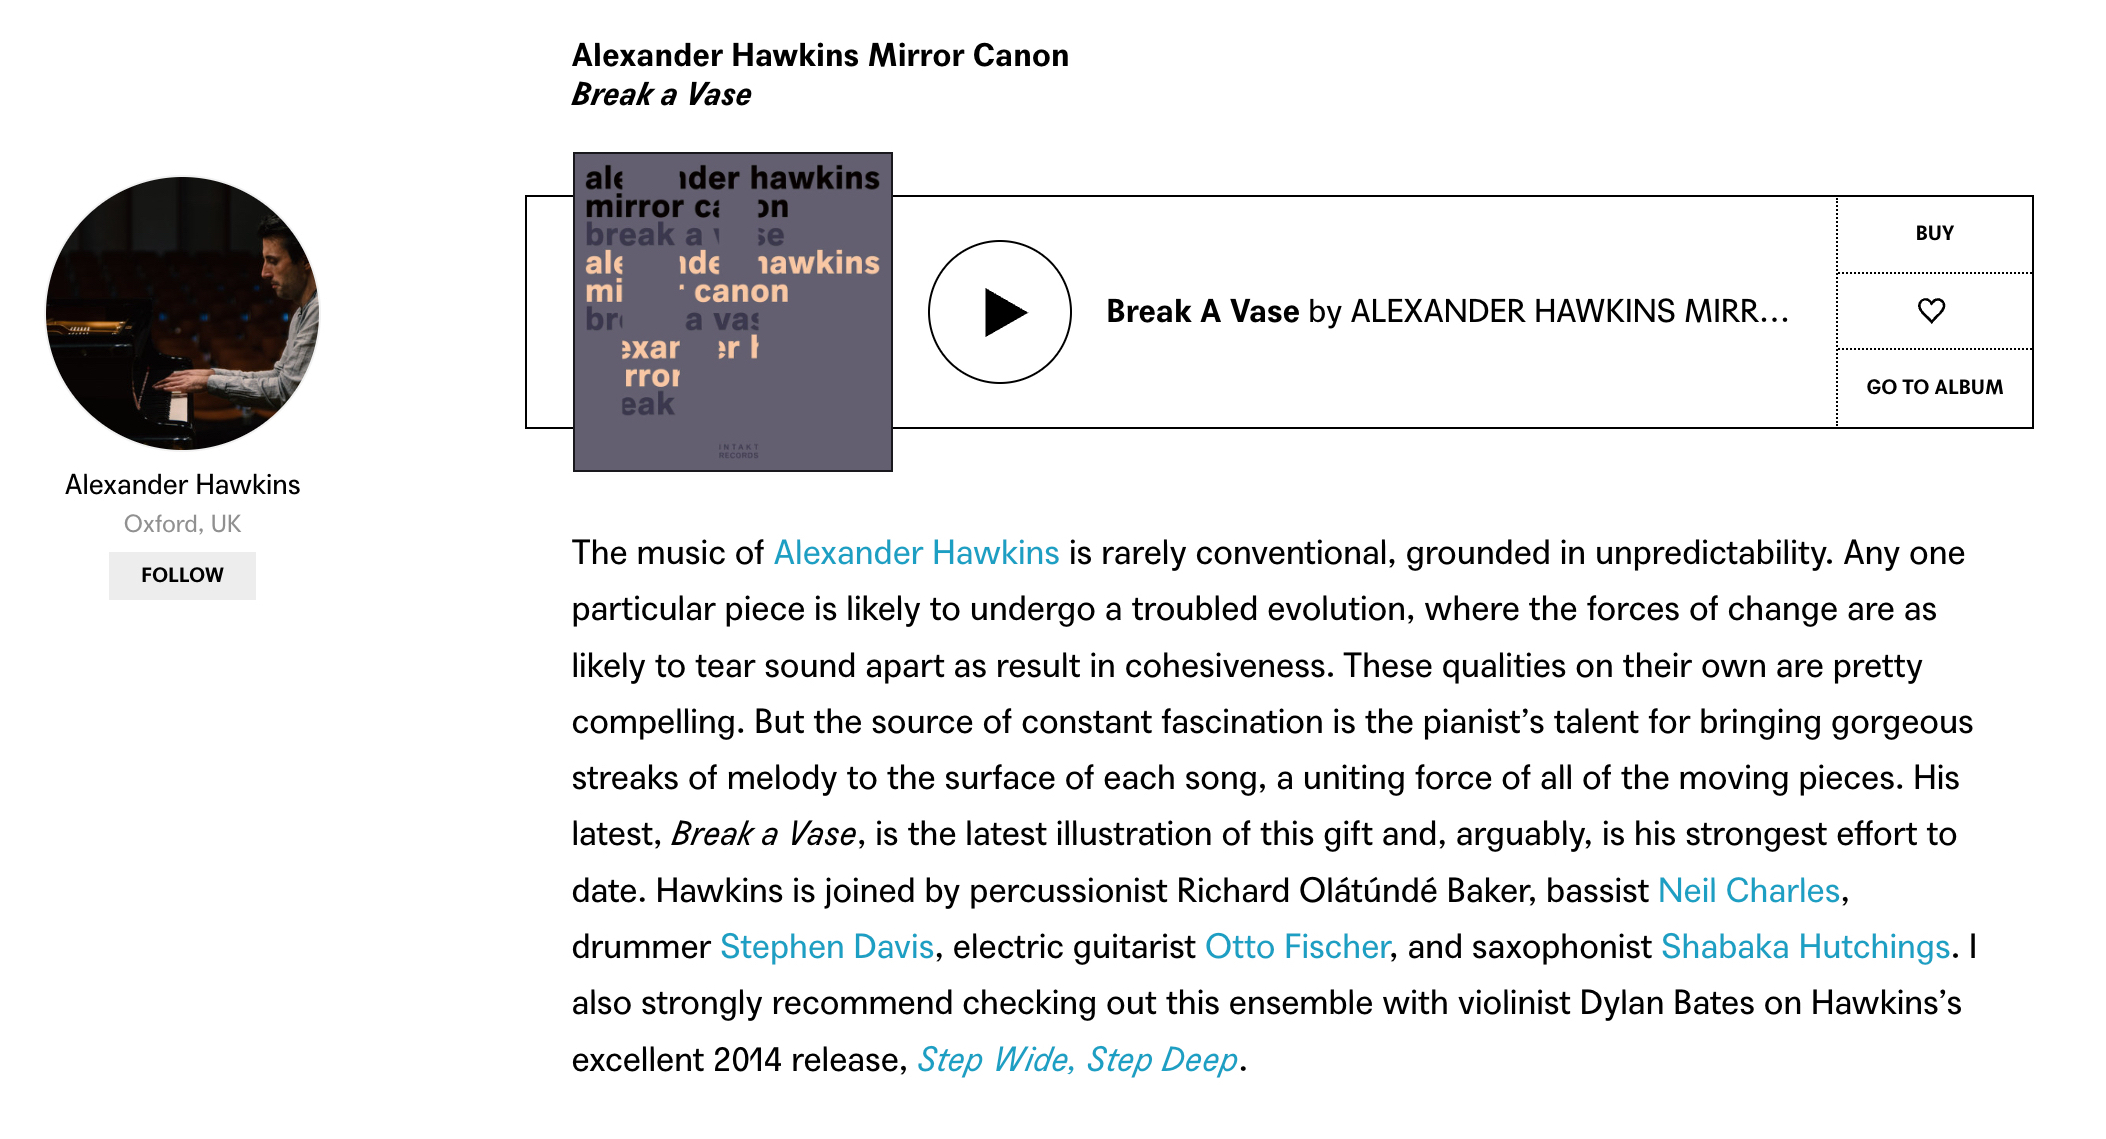 The music of Alexander Hawkins is rarely conventional, grounded in unpredictability. Any one particular piece is likely to undergo a troubled evolution, where the forces of change are as likely to tear sound apart as result in cohesiveness. These qualities on their own are pretty compelling. But the source of constant fascination is the pianist’s talent for bringing gorgeous streaks of melody to the surface of each song, a uniting force of all of the moving pieces. His latest, Break a Vase, is the latest illustration of this gift and, arguably, is his strongest effort to date. Hawkins is joined by percussionist Richard Olátúndé Baker, bassist Neil Charles, drummer Stephen Davis, electric guitarist Otto Fischer, and saxophonist Shabaka Hutchings. I also strongly recommend checking out this ensemble with violinist Dylan Bates on Hawkins’s excellent 2014 release, Step Wide, Step Deep.